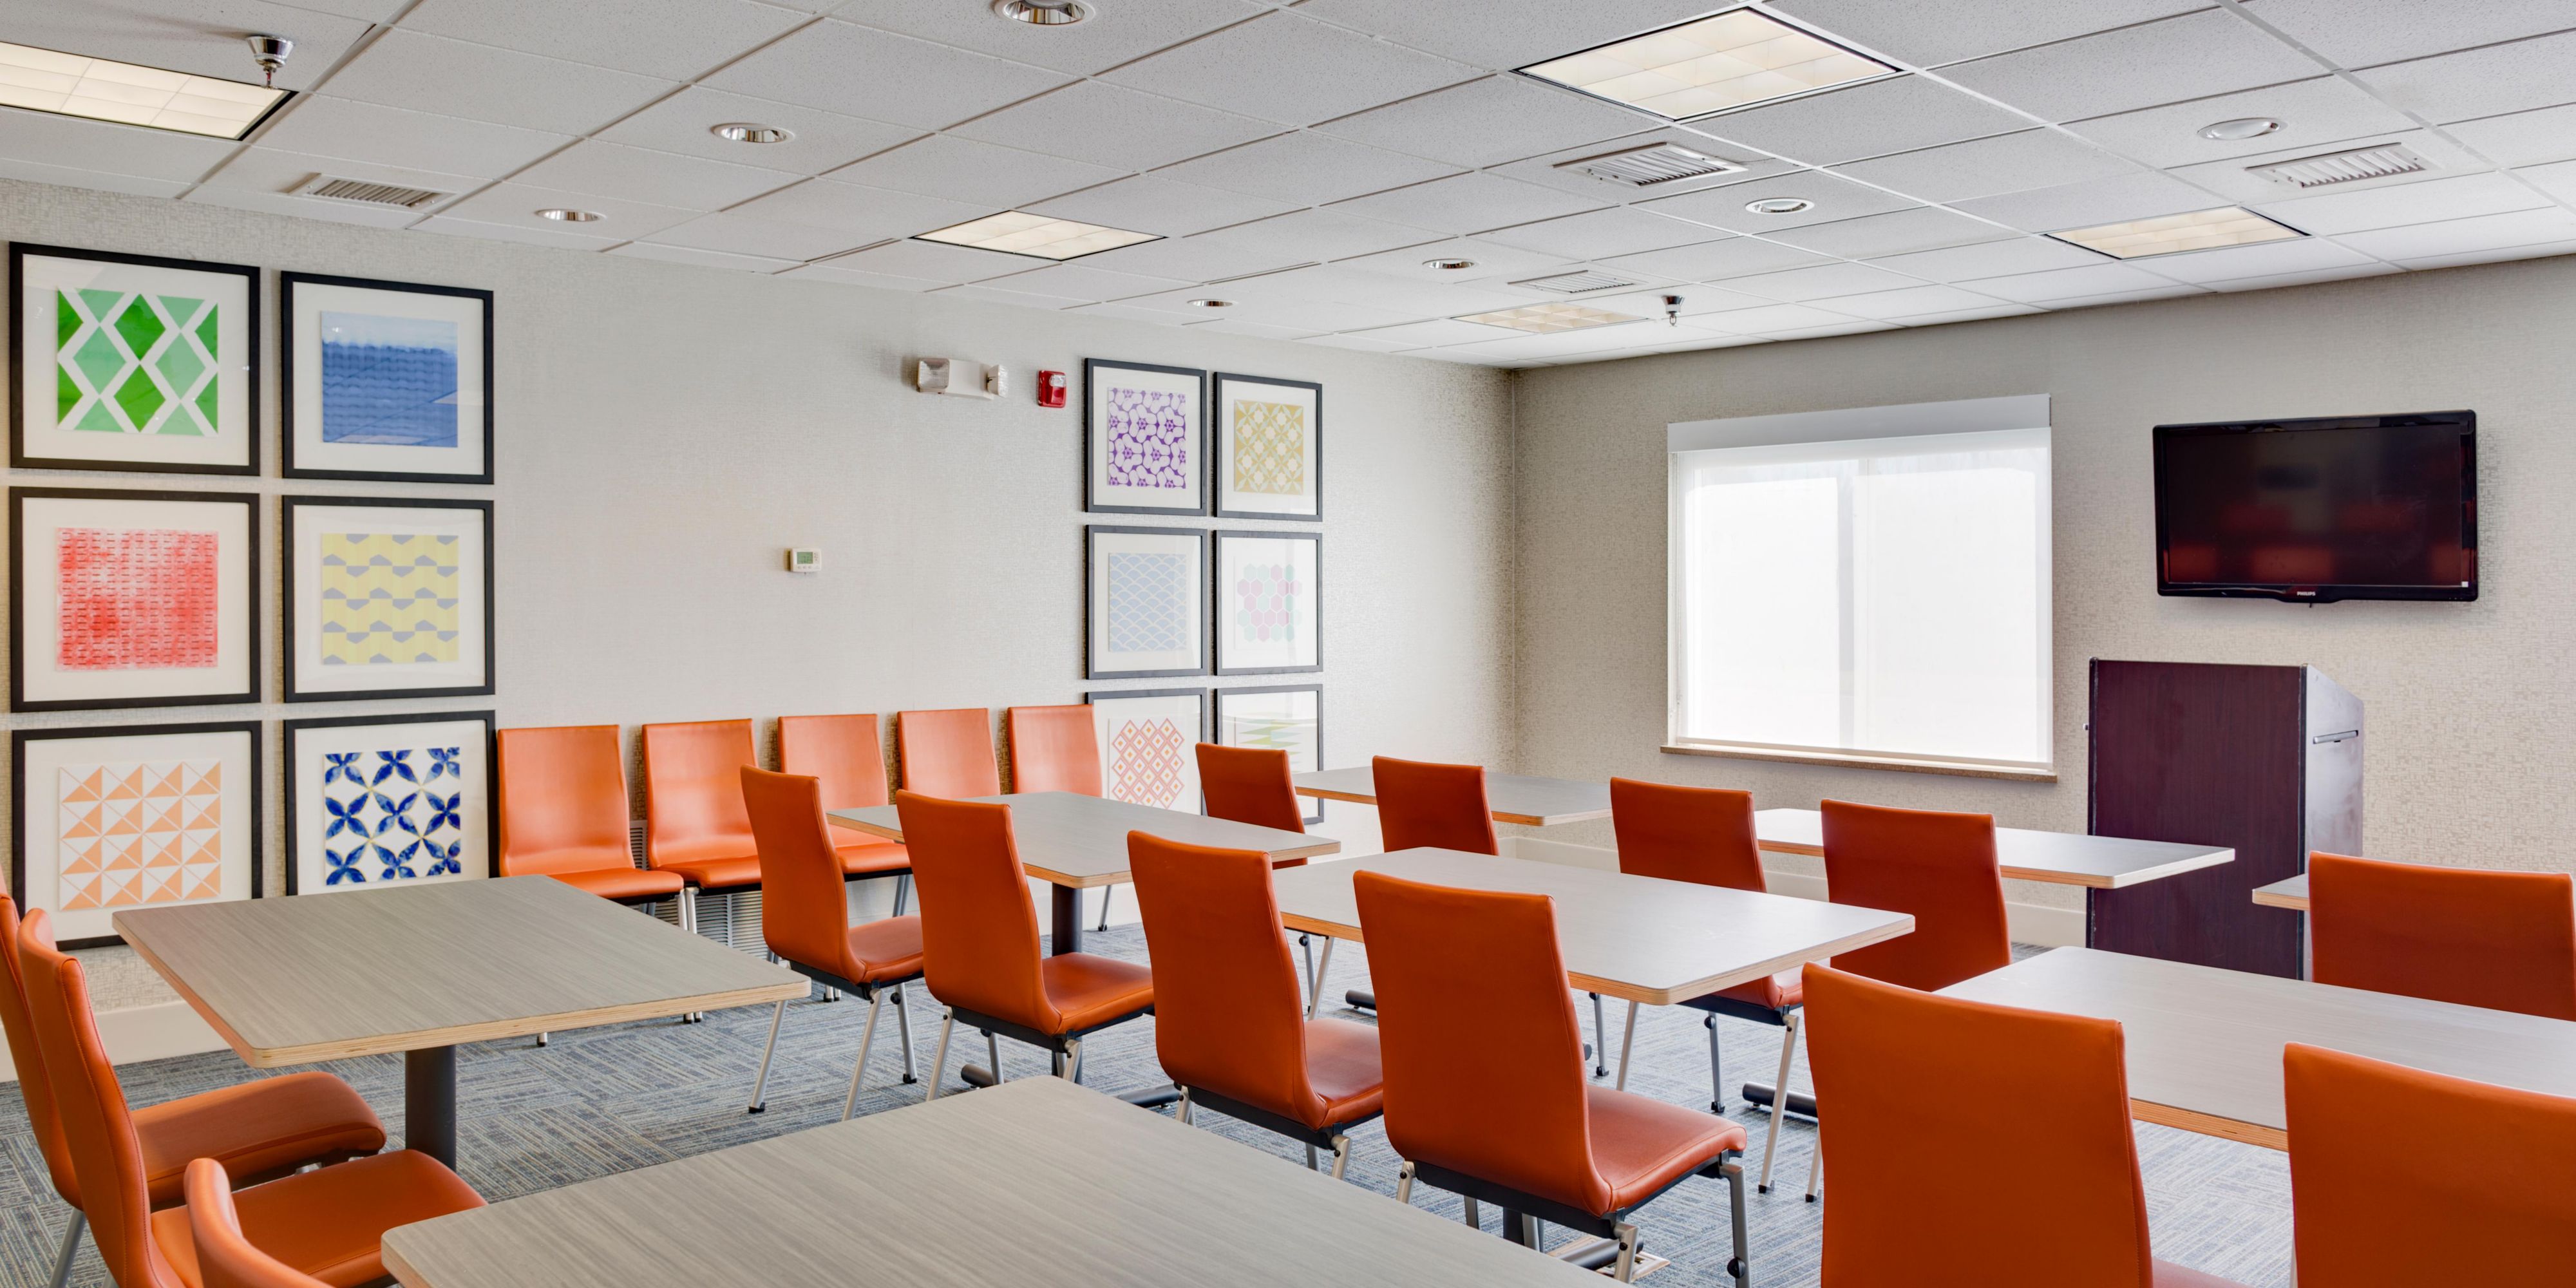 Host a formal business meeting or a unique special occasion in our versatile meeting space. Our hotel offers 576 sq. ft. of space, catering options, and event planning experts. Contact our Sales Office for your next event.